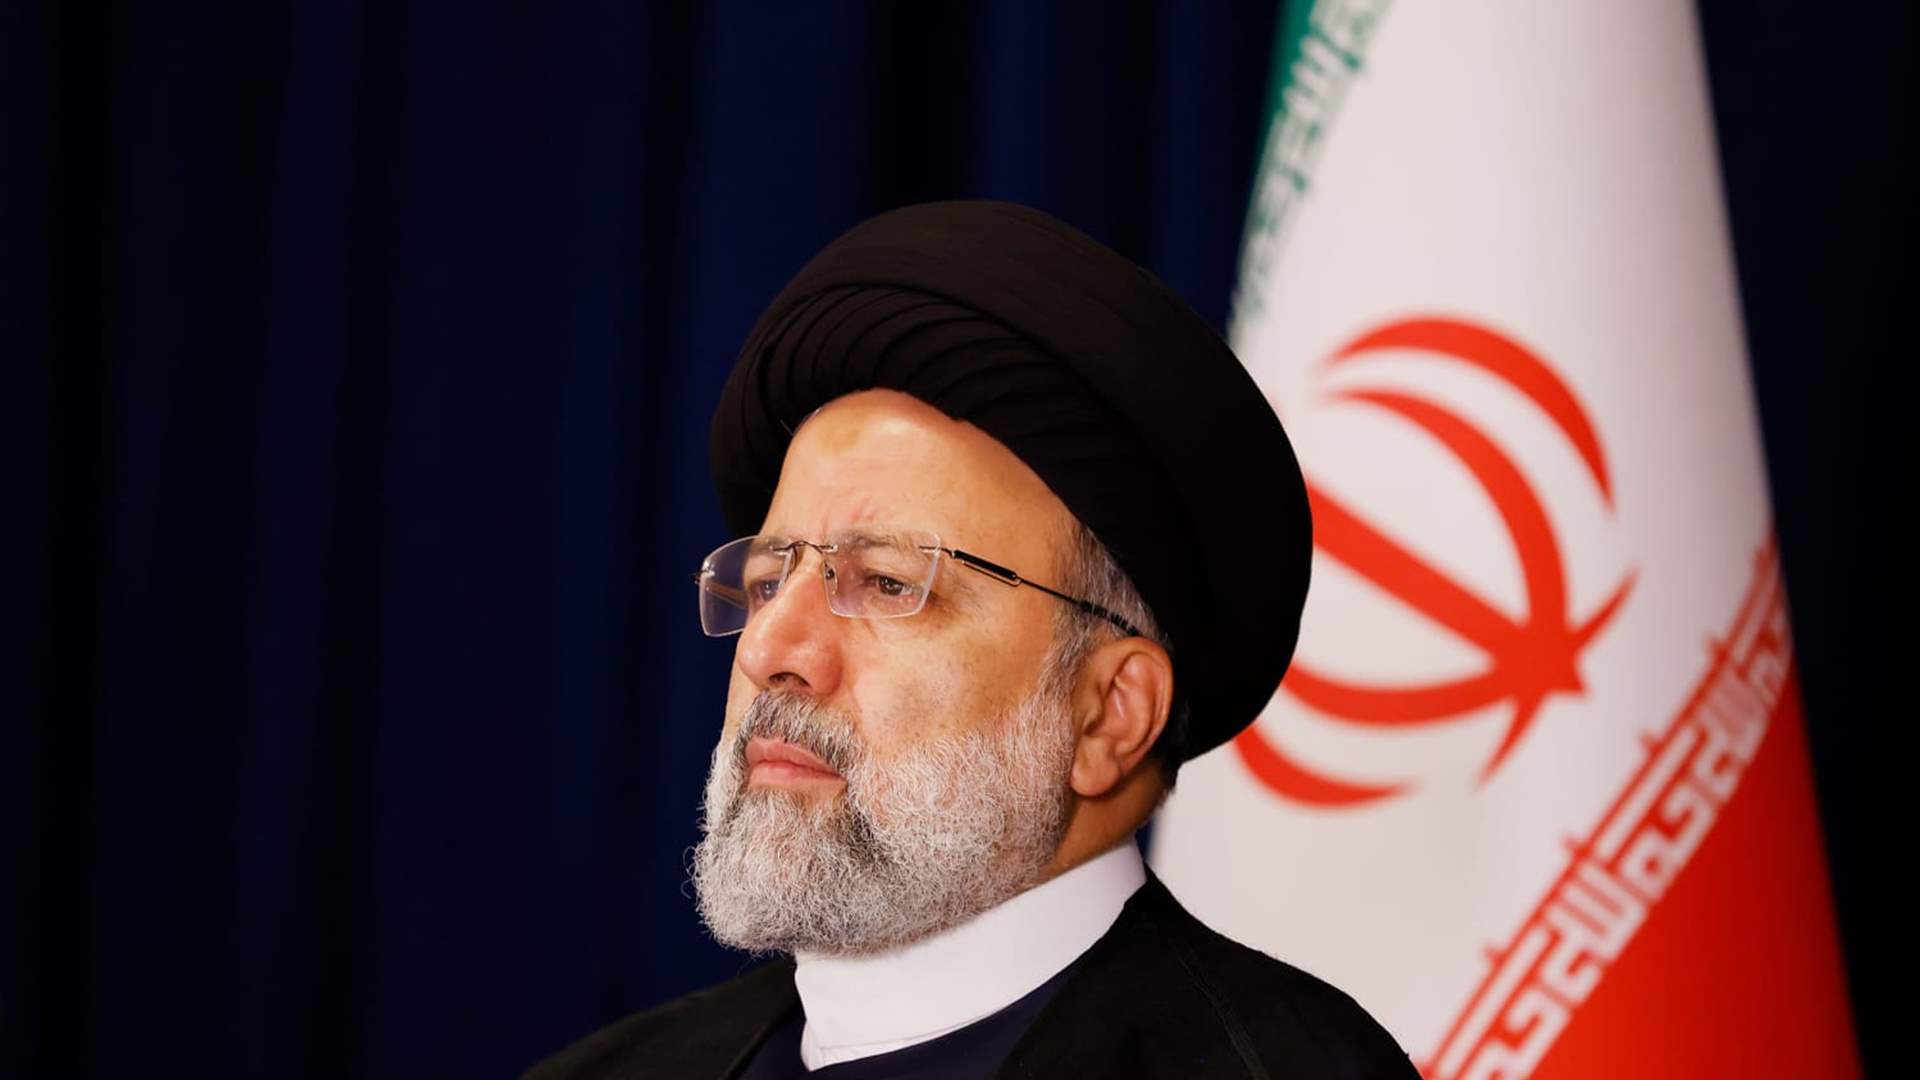 After the death of Iran&#39;s President while in office: What happens next?